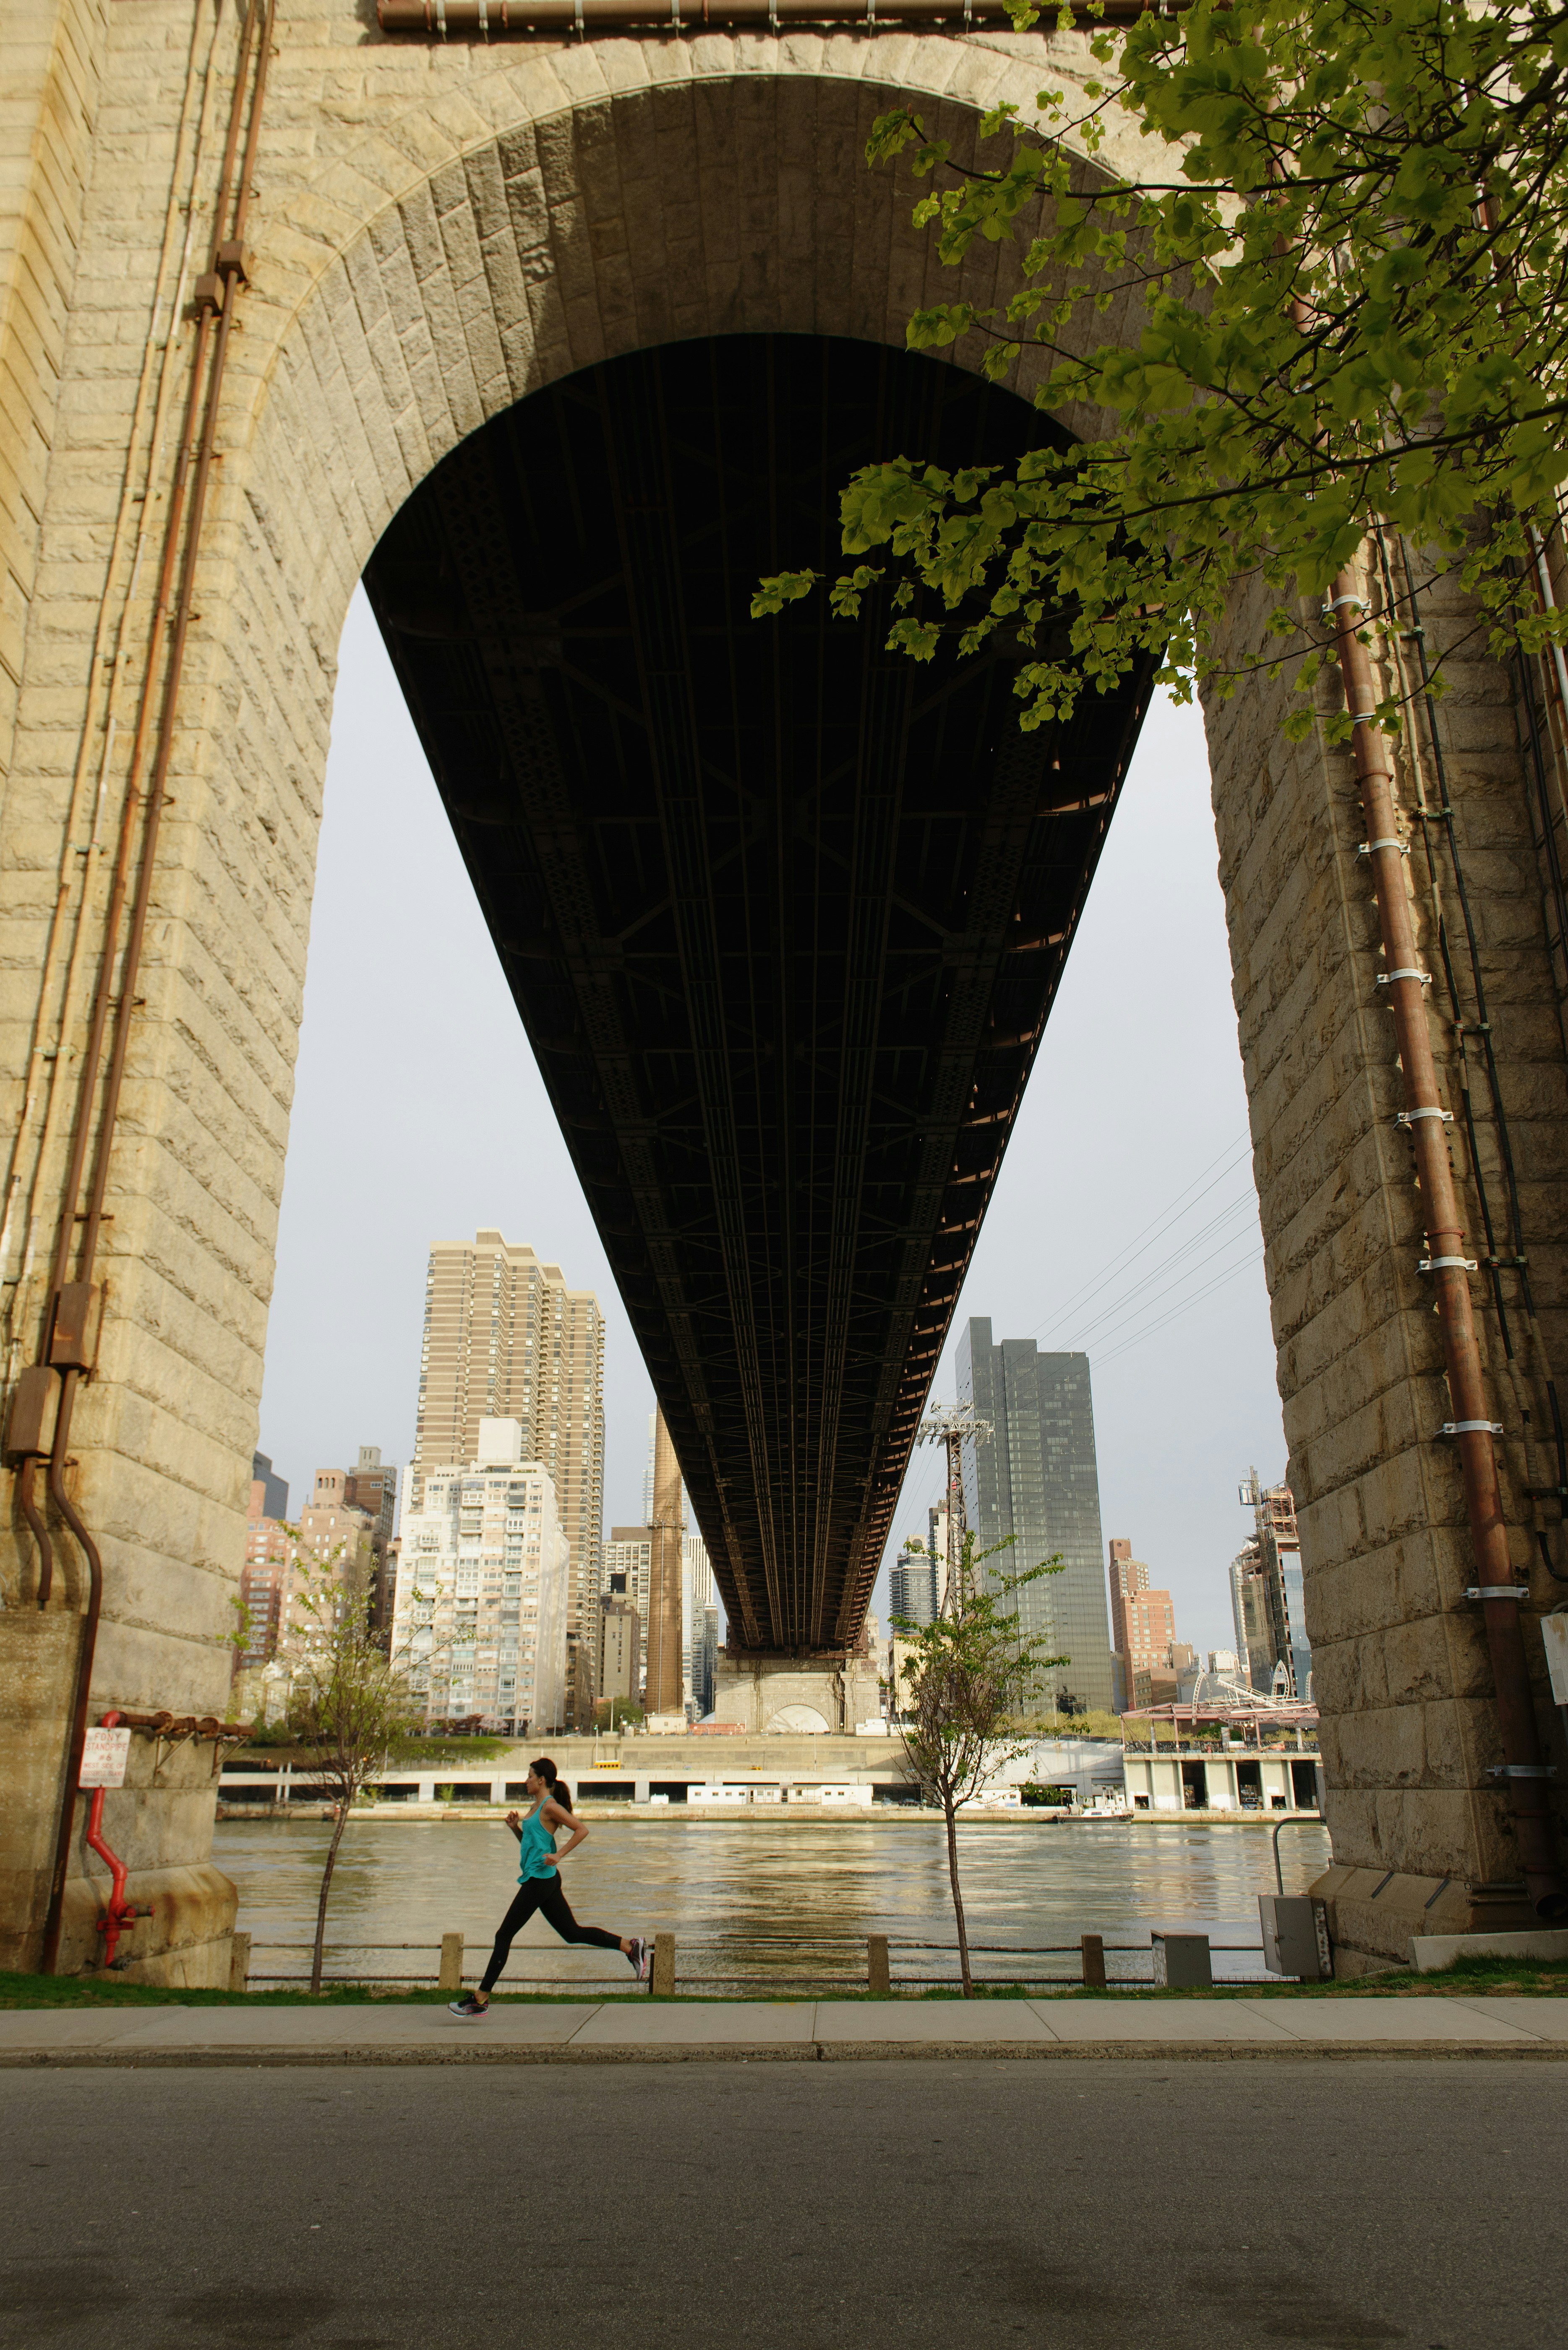 A woman is running on the sidewalk under one of the arches of the Queensboro Bridge on Roosevelt Island, New York. Across the river, skyscrapers and large buildings can be seen.